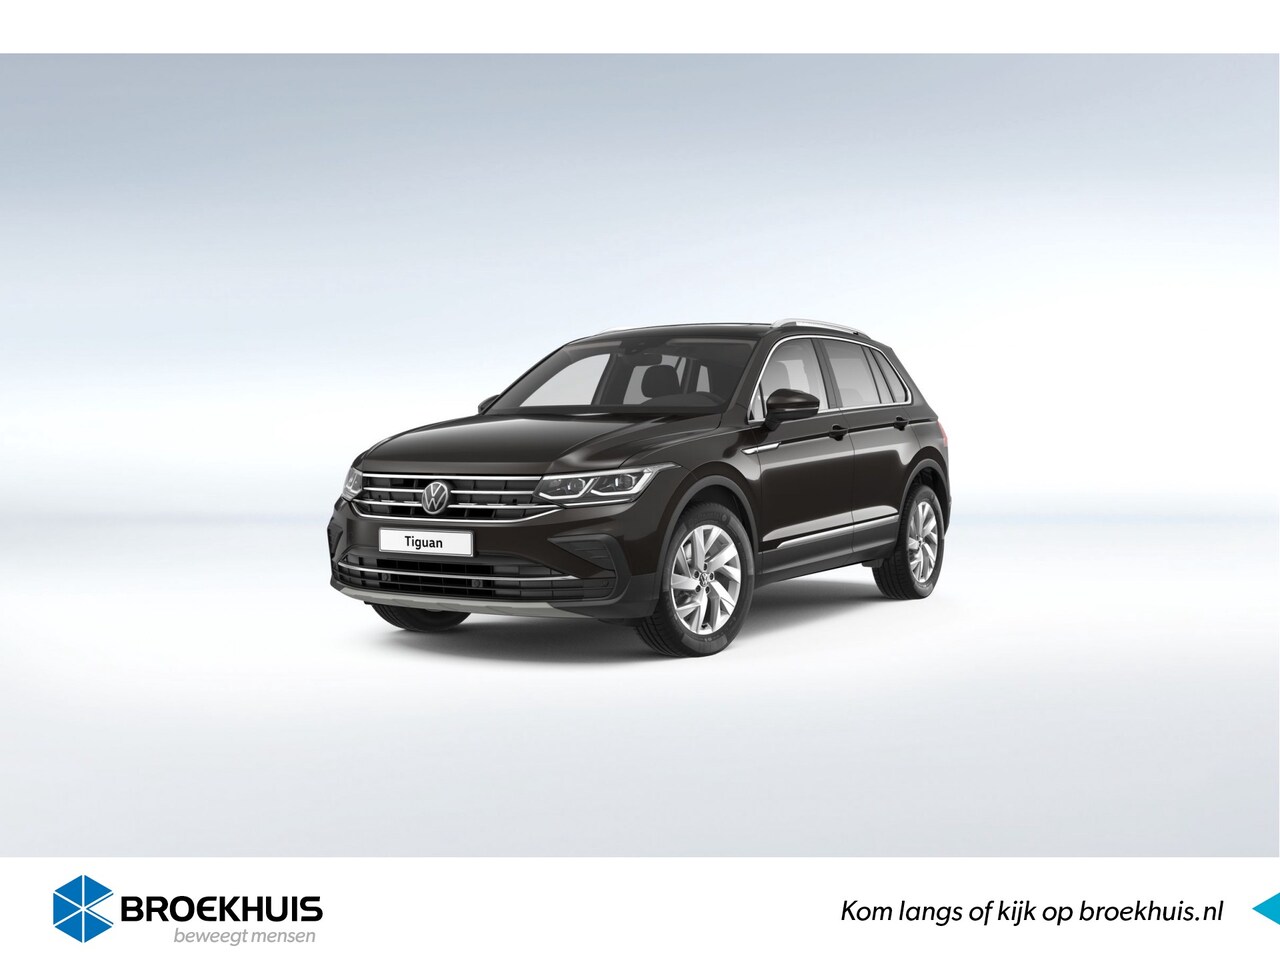 altijd Buskruit gisteren volkswagen tiguan netherlands used – Search for your used car on the parking